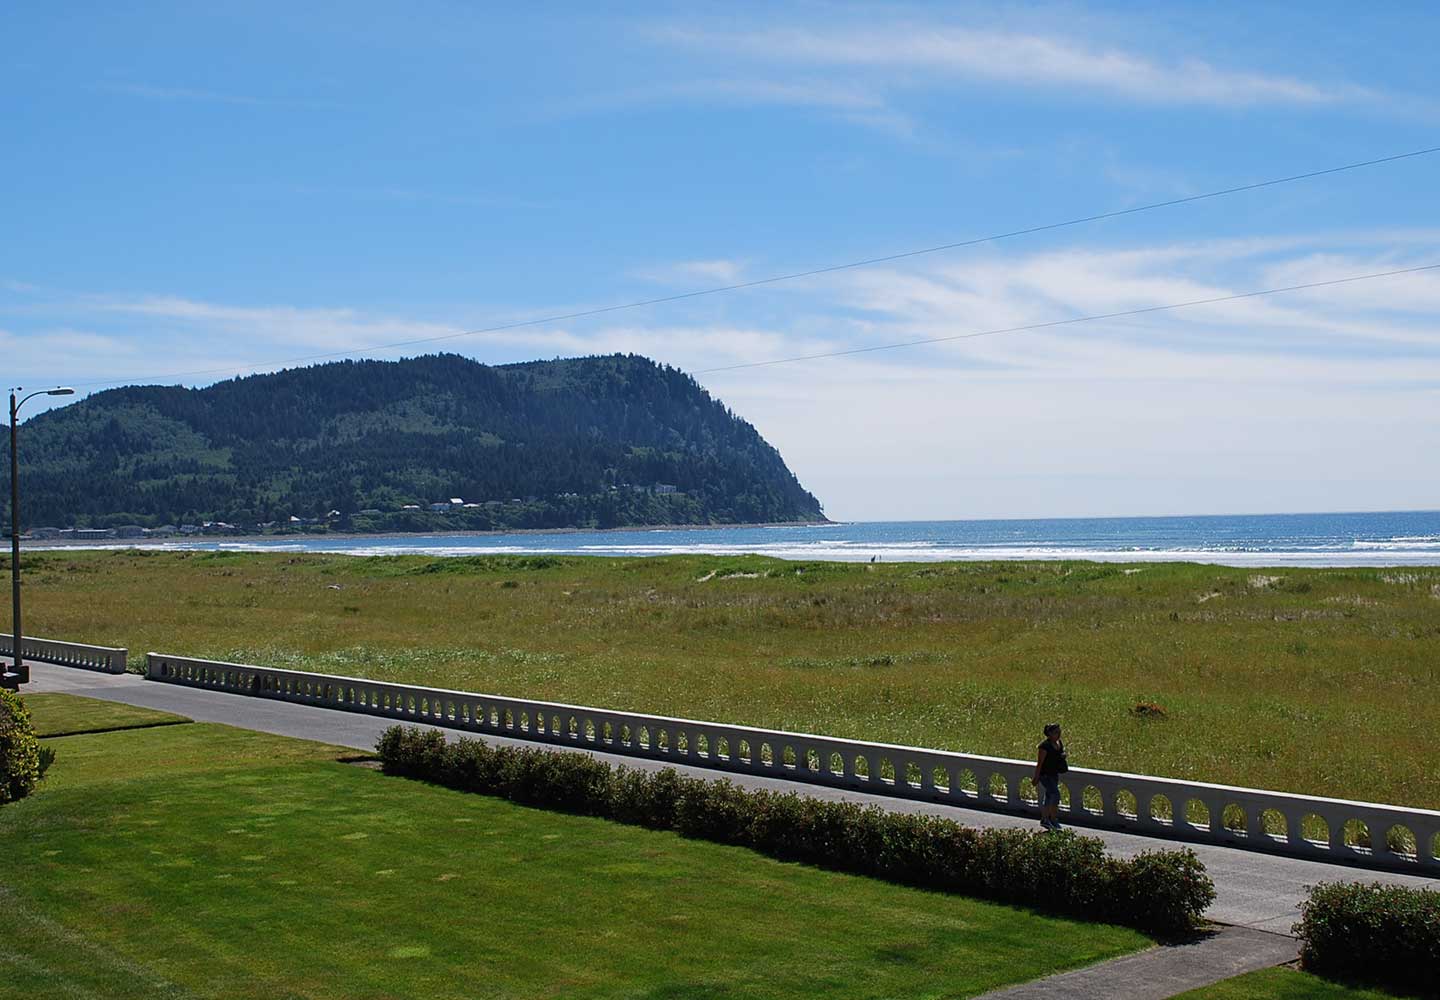 Seaside, OR trail and landscape